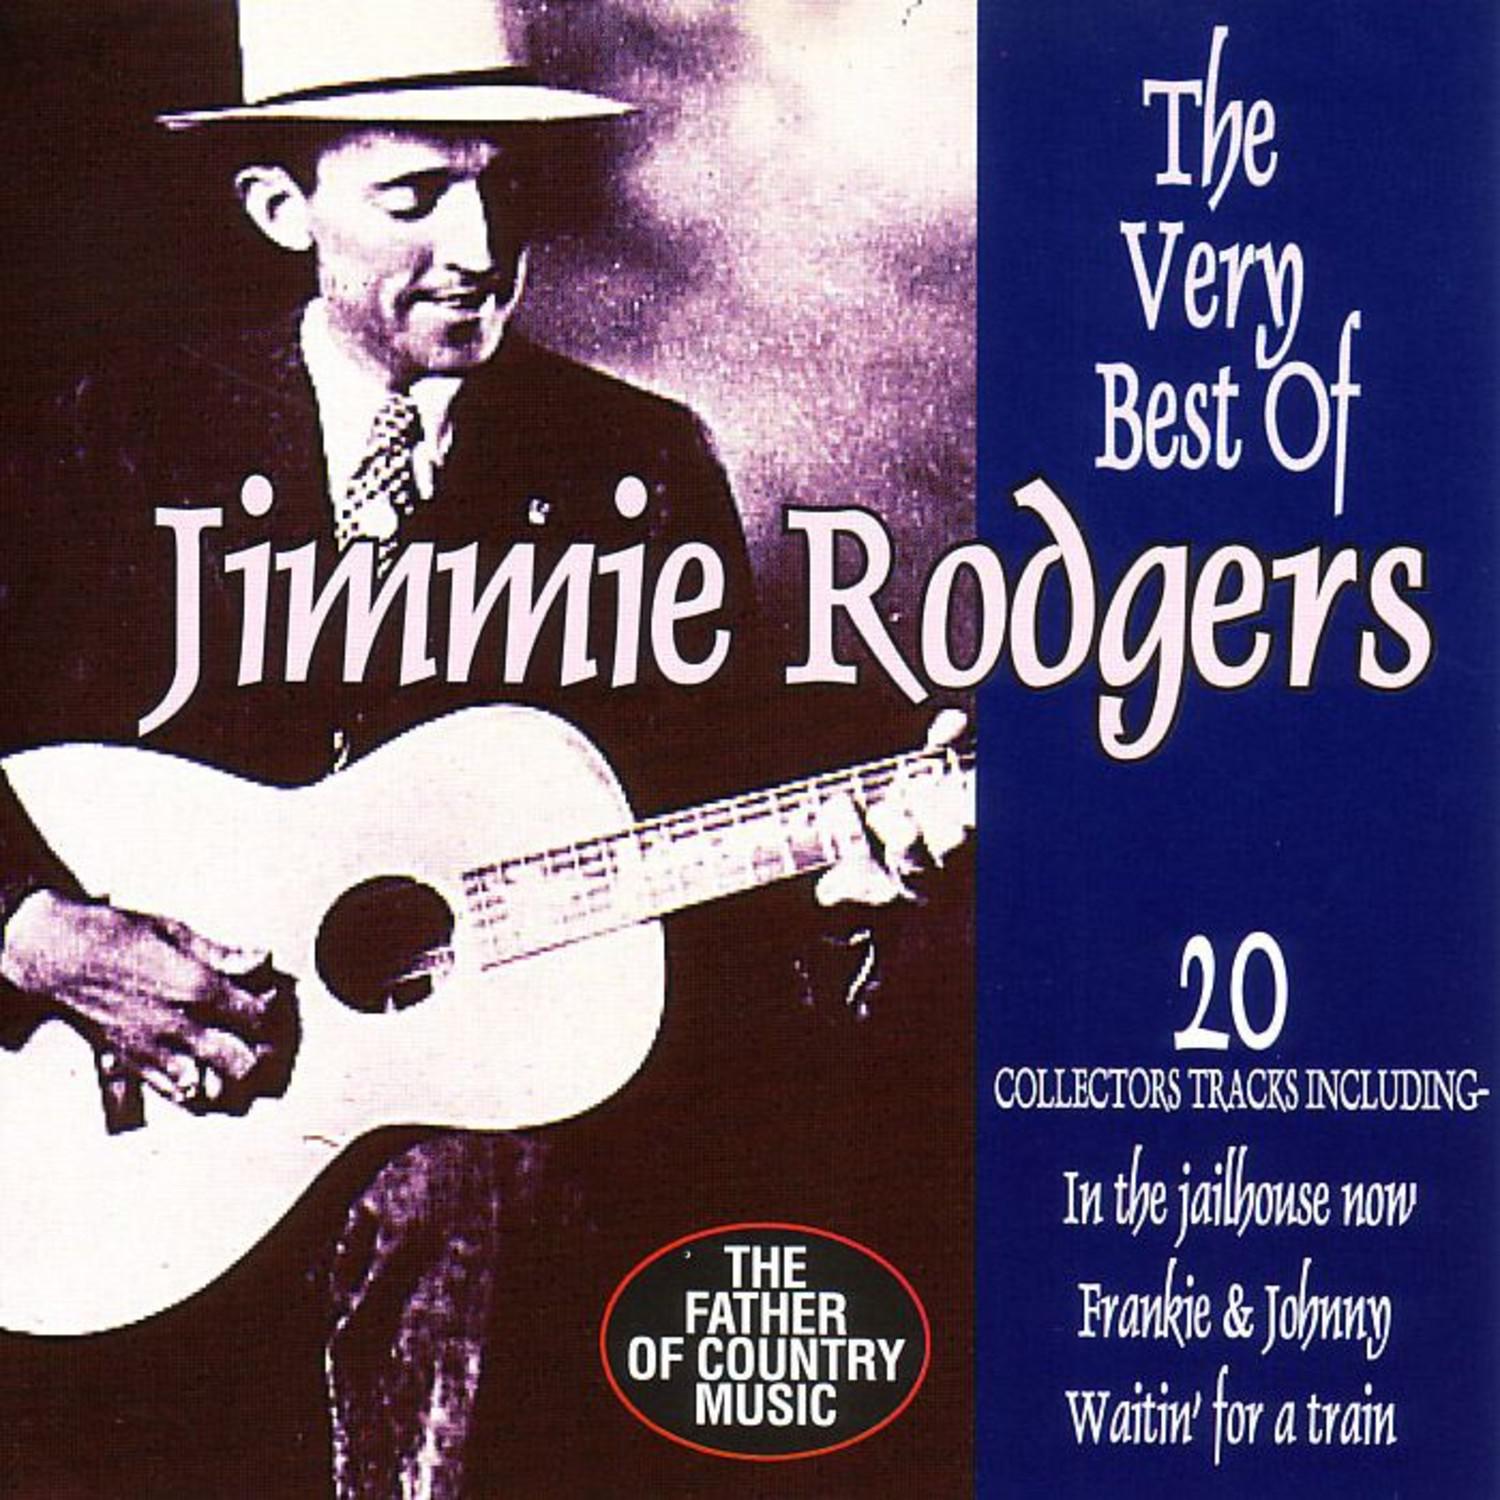 The Very Best Of Jimmie Rodgers - 20 Collectors Tracks